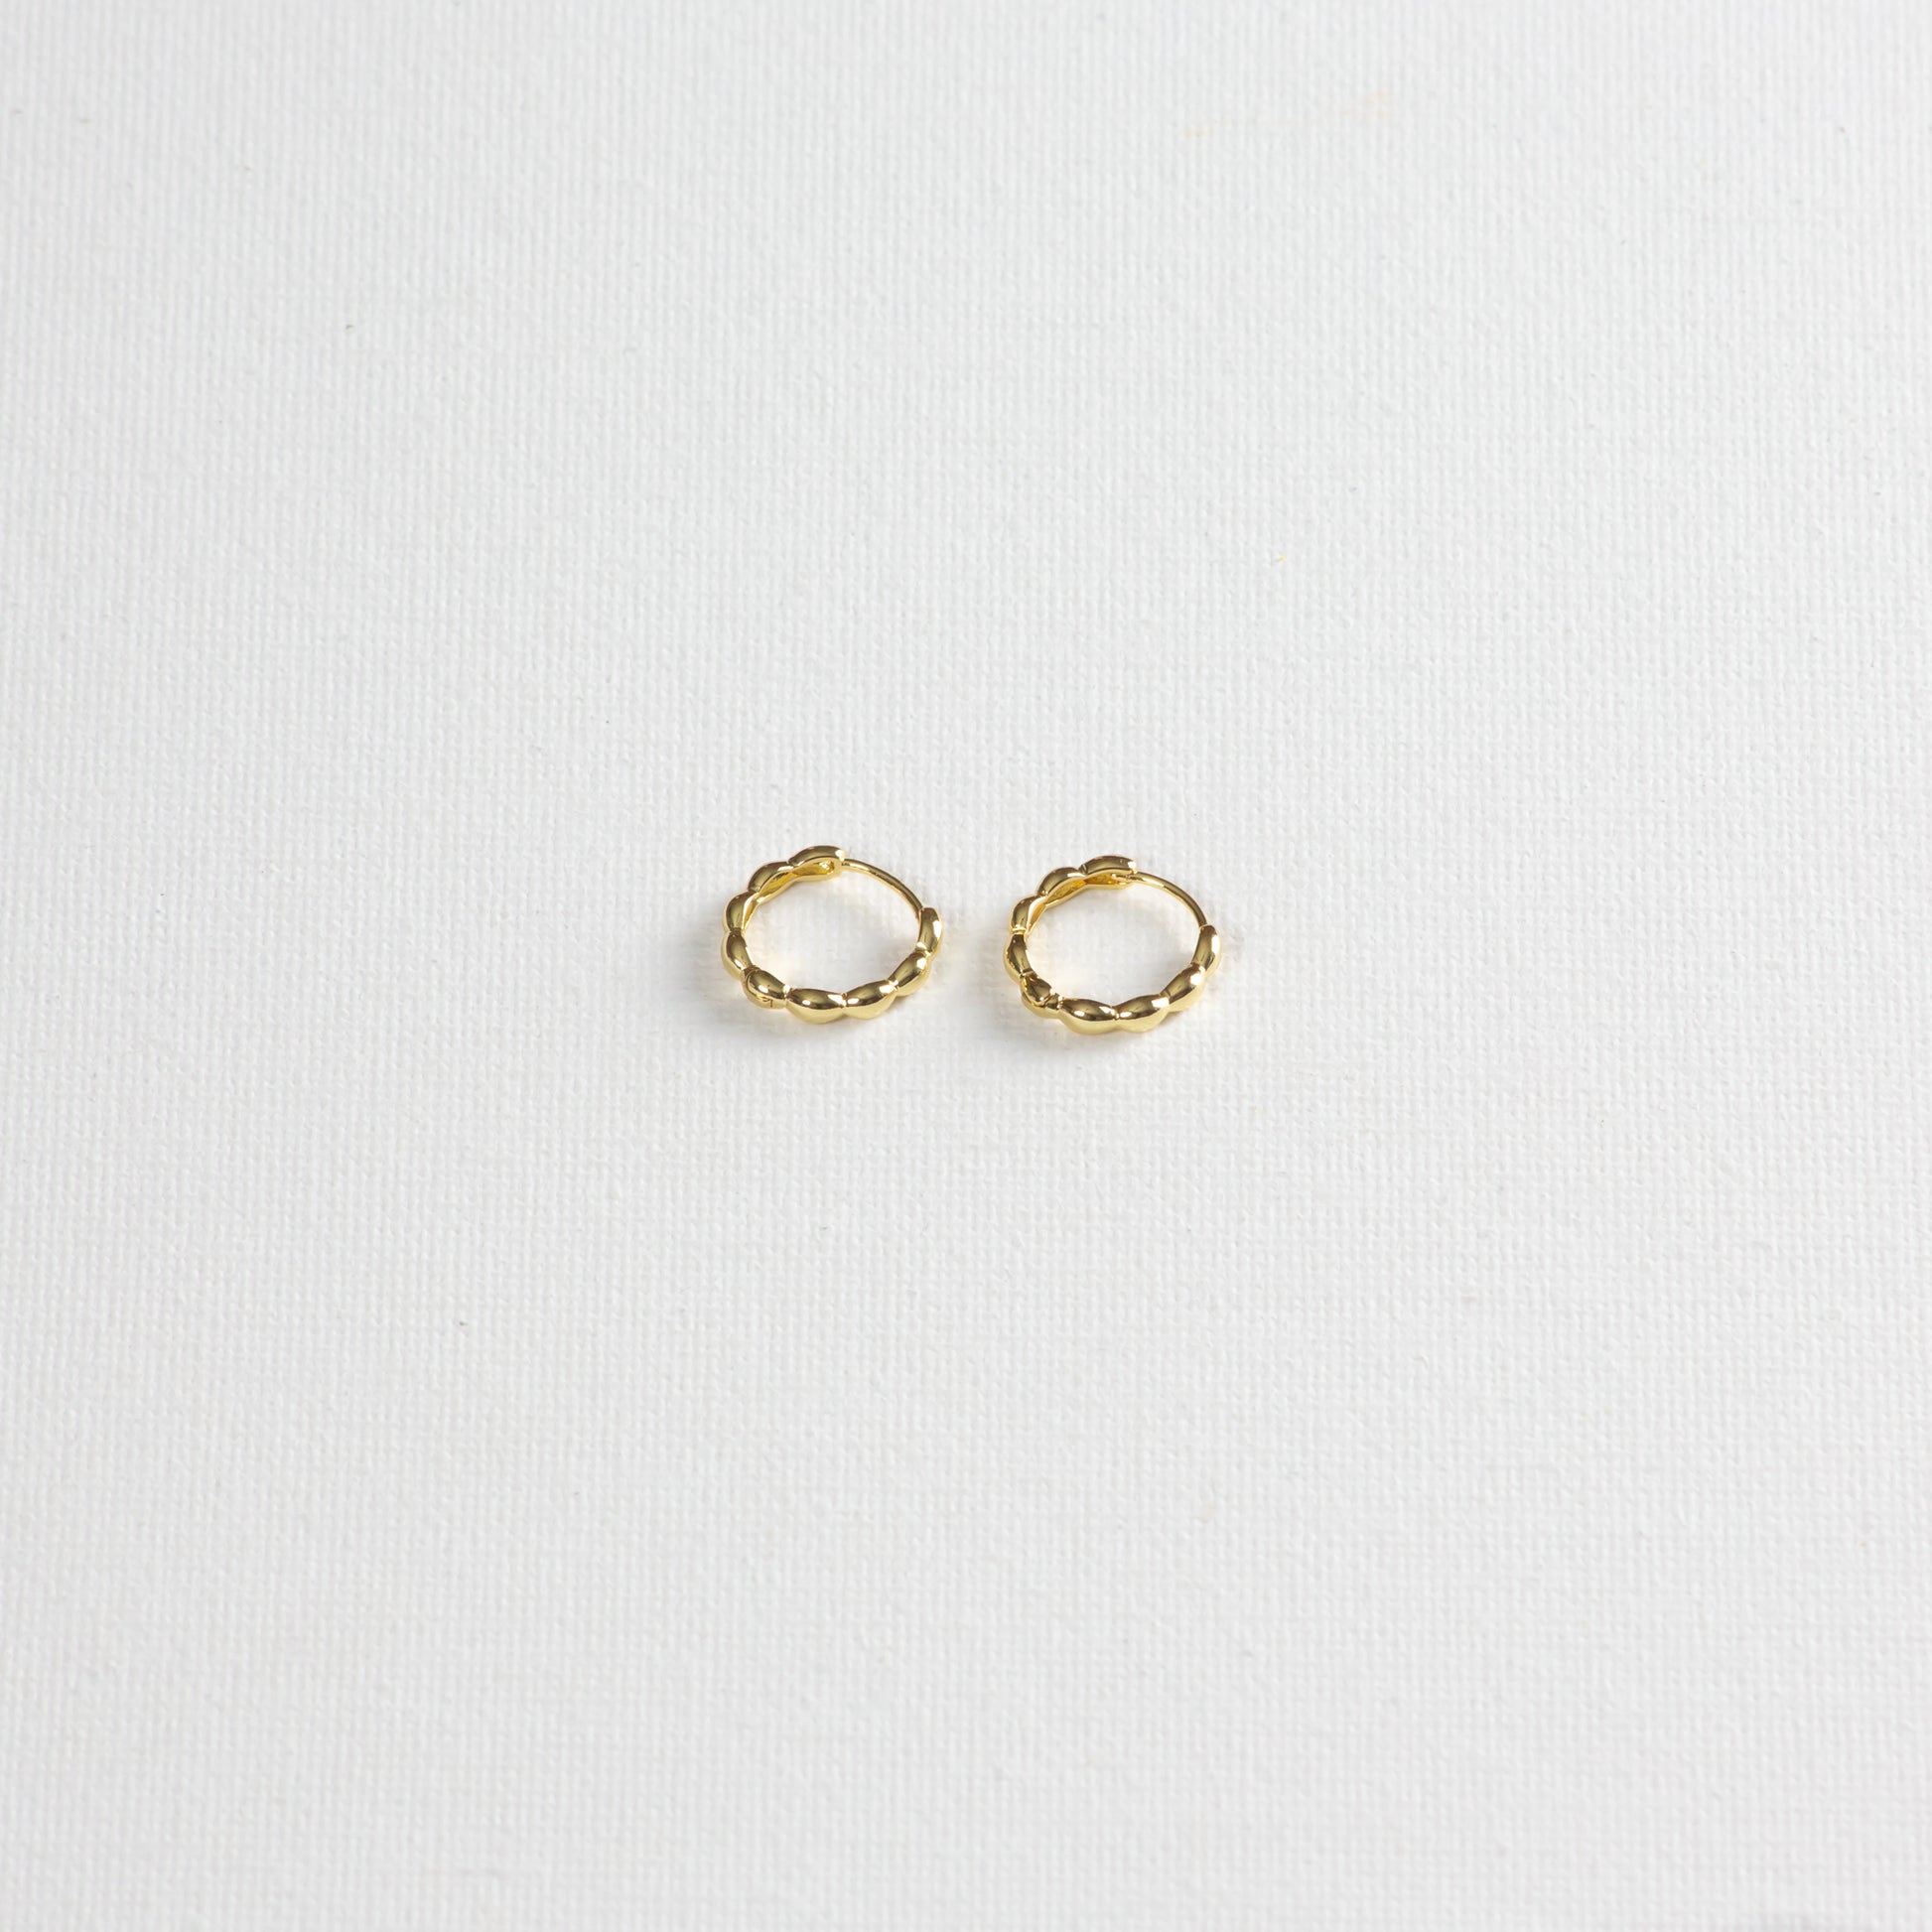 Oryza hoops, gold hoops with rounded textures, photographed on a white background. The photo is taken at a slight angle from the bottom.